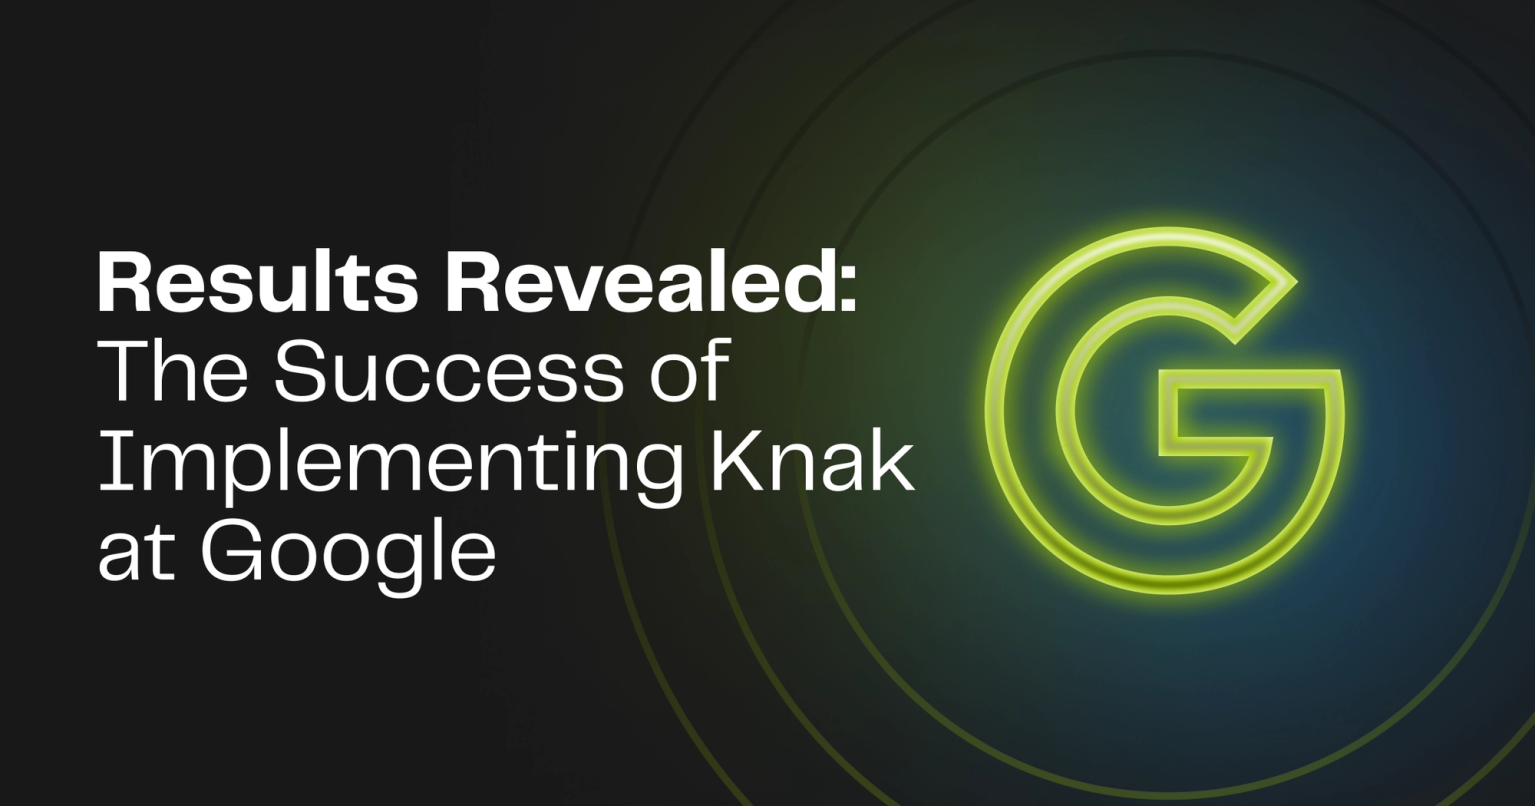 Results Revealed: The Success of Implementing Knak at Google